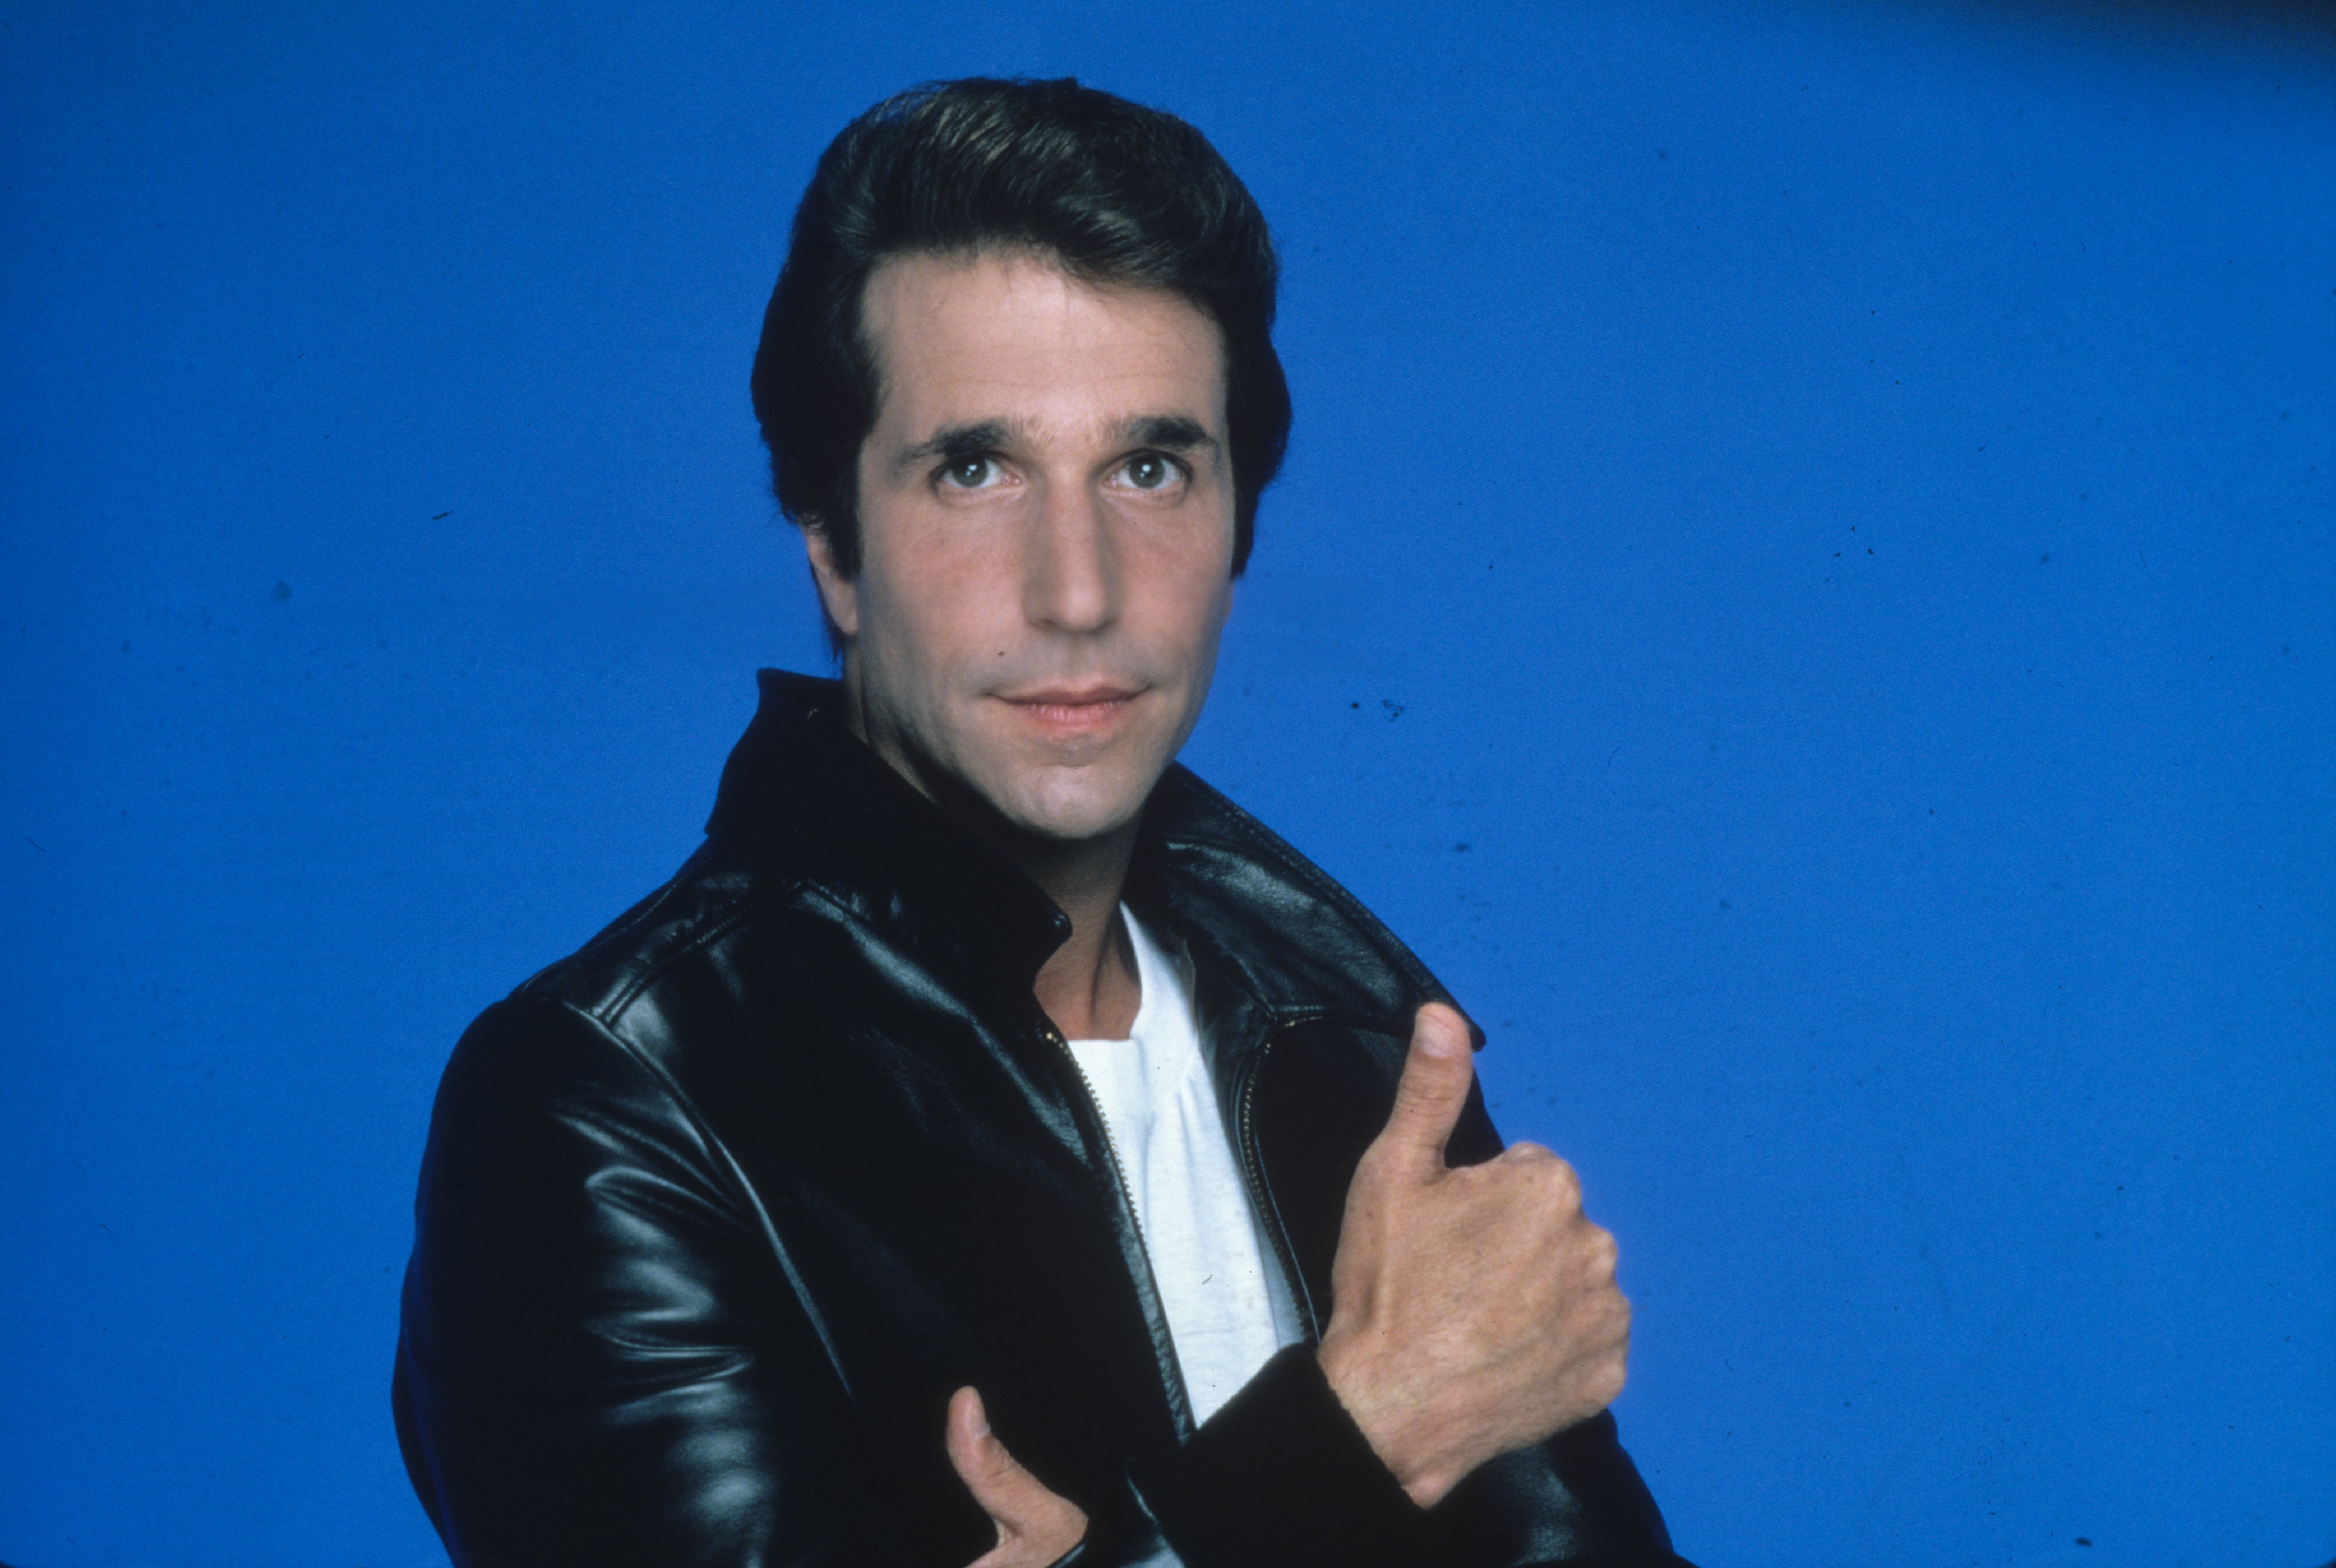 Hentry Winkler during season two of "Happy Days" in 2007. | Source: Getty Images